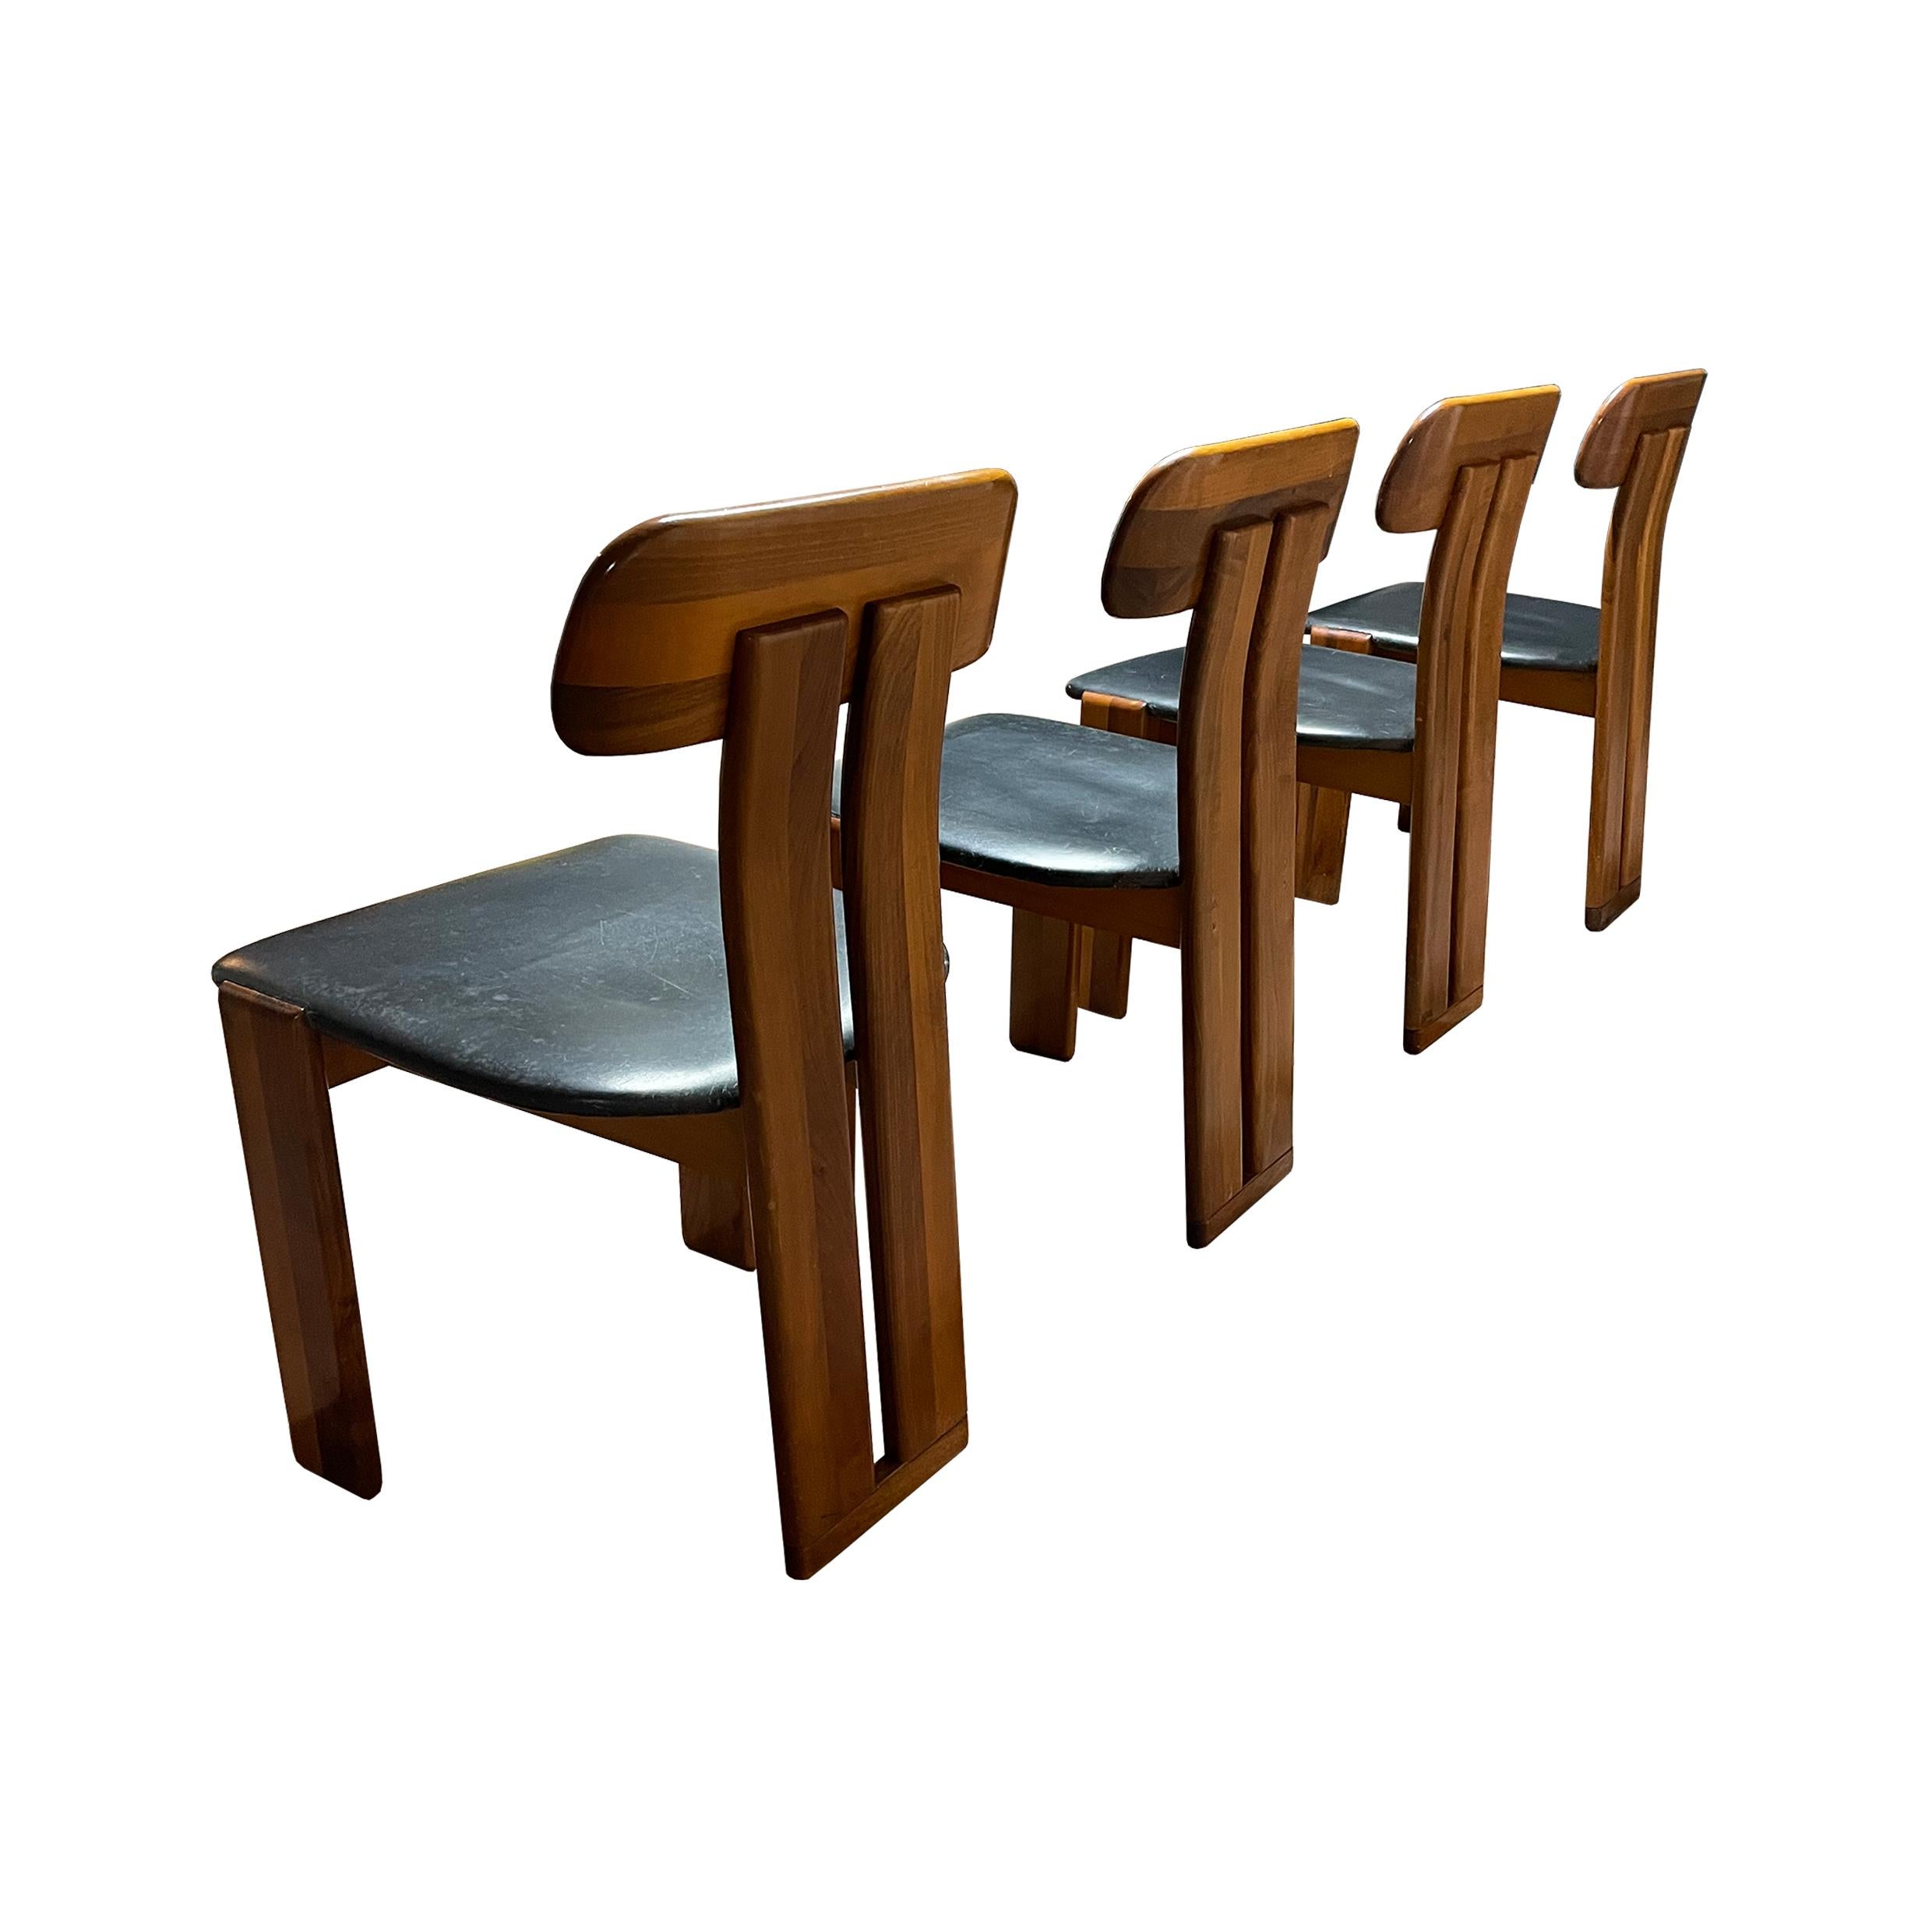 Set of four “Sapporo” dining chairs, designed by Mario Marenco and produced by the Italian manufacturer Mobilgirgi in the 1970s.
They feature a walnut briar structure and a black leather seater.
It is also available the extensible table from the